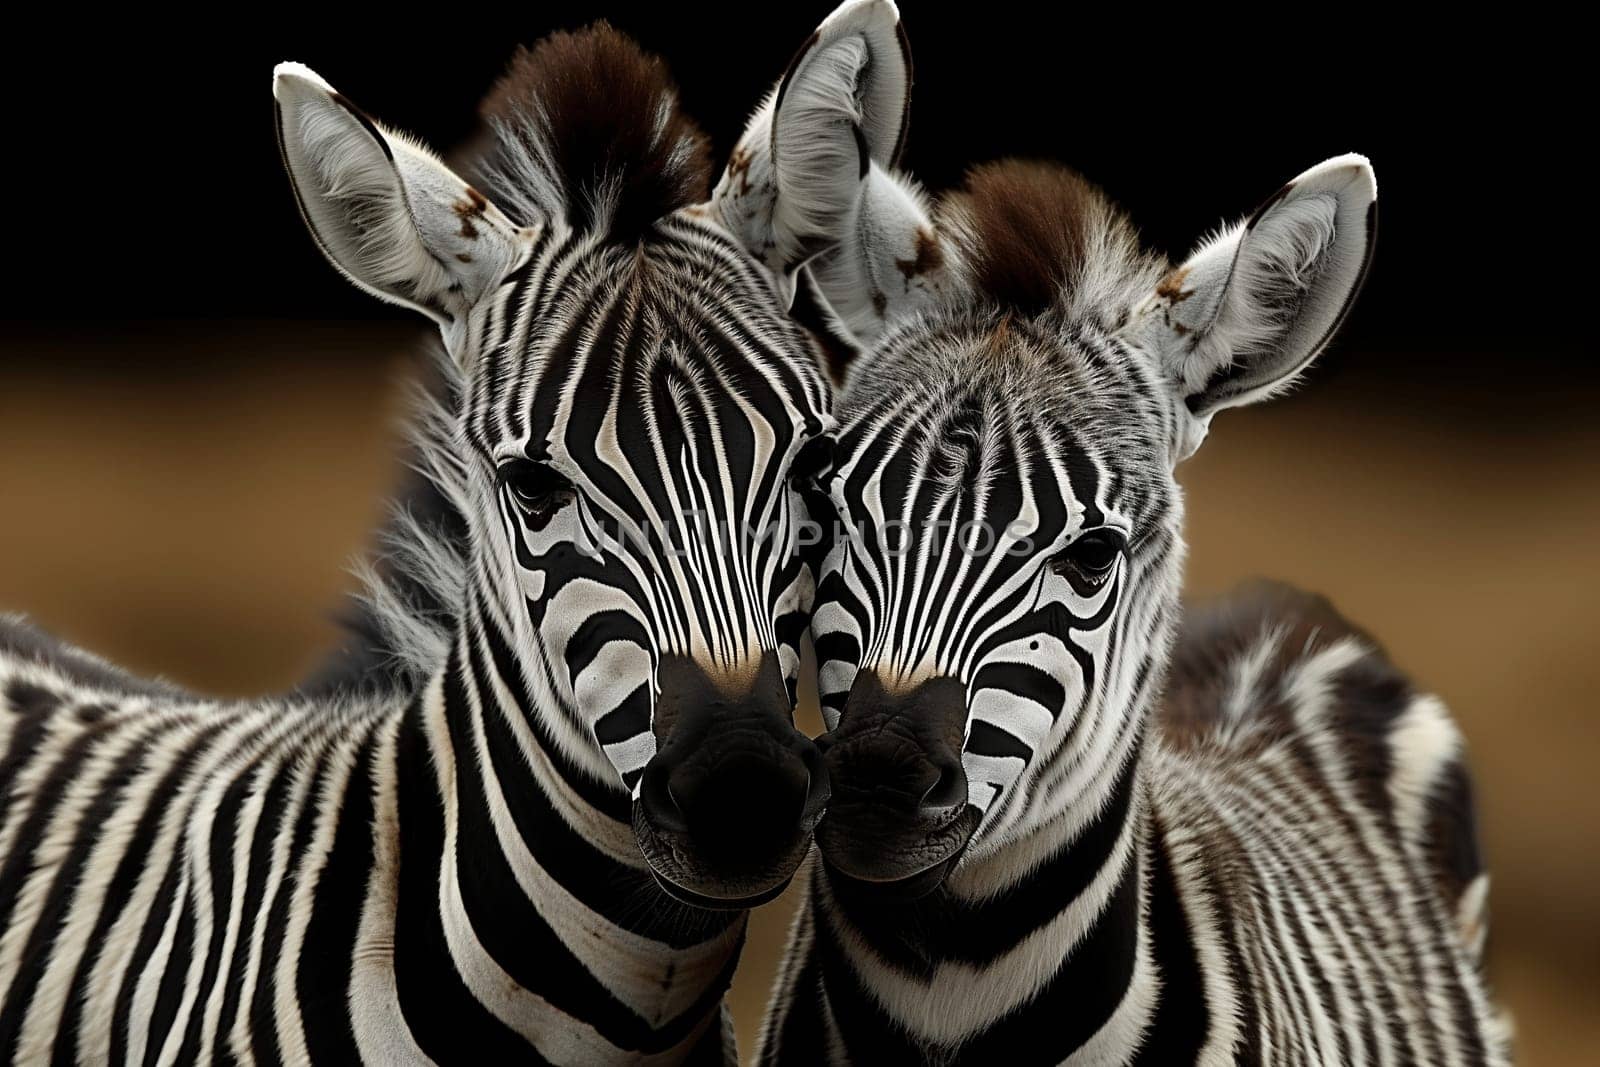 Two baby zebras with black and white stripes looking at camera by richwolf